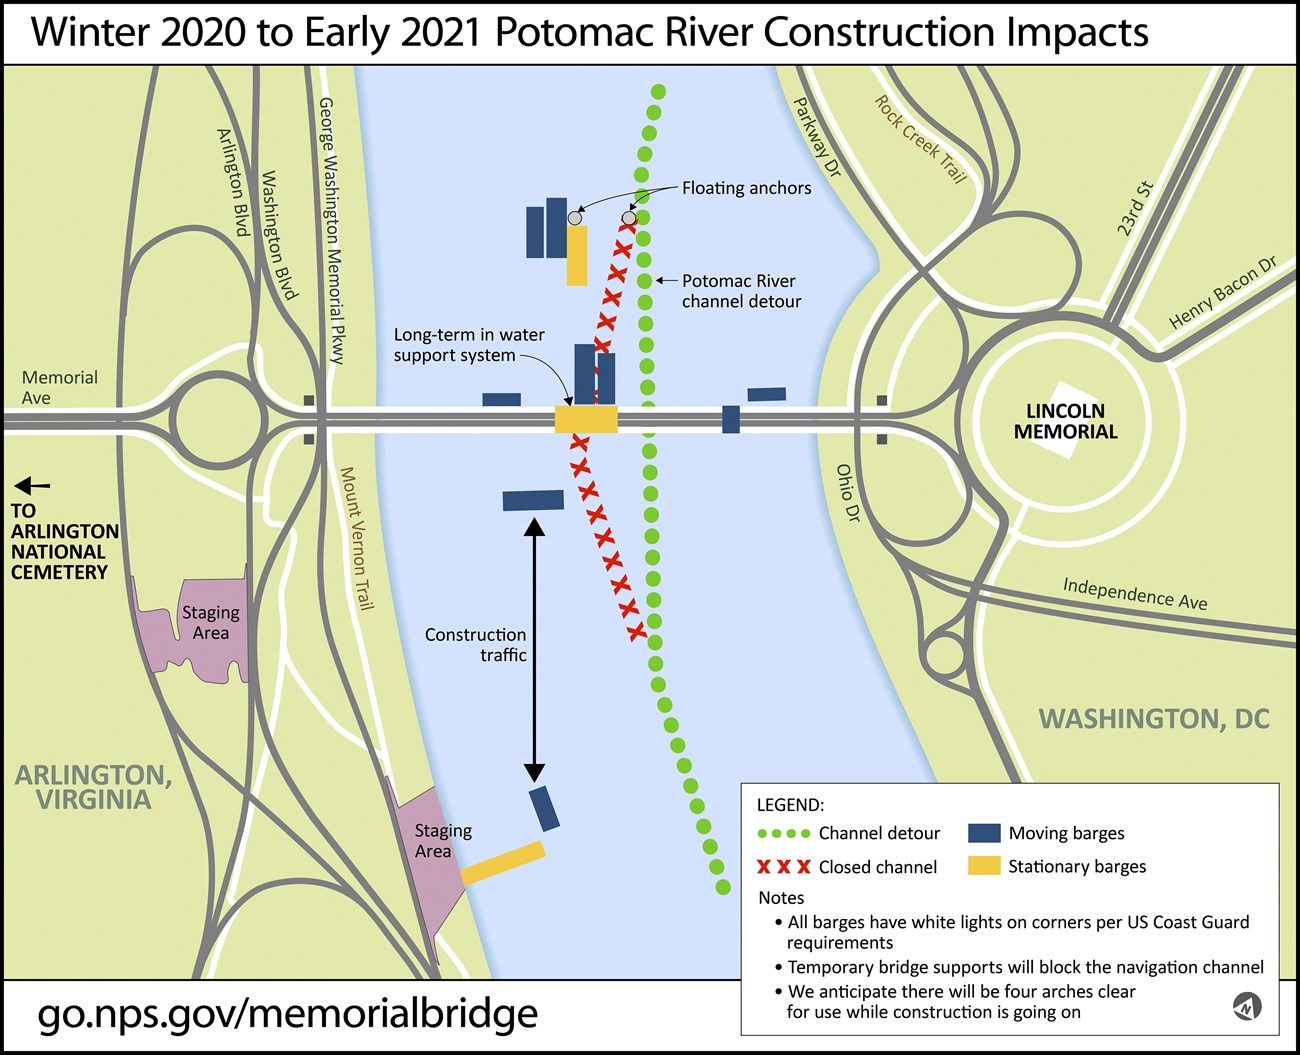 Barges will be moving in the Potomac River until work on Arlington Memorial Bridge is complete in early 2021.  Barges will move on the north and south sides of the bridge.  River users be alert and stay away from construction traffic.